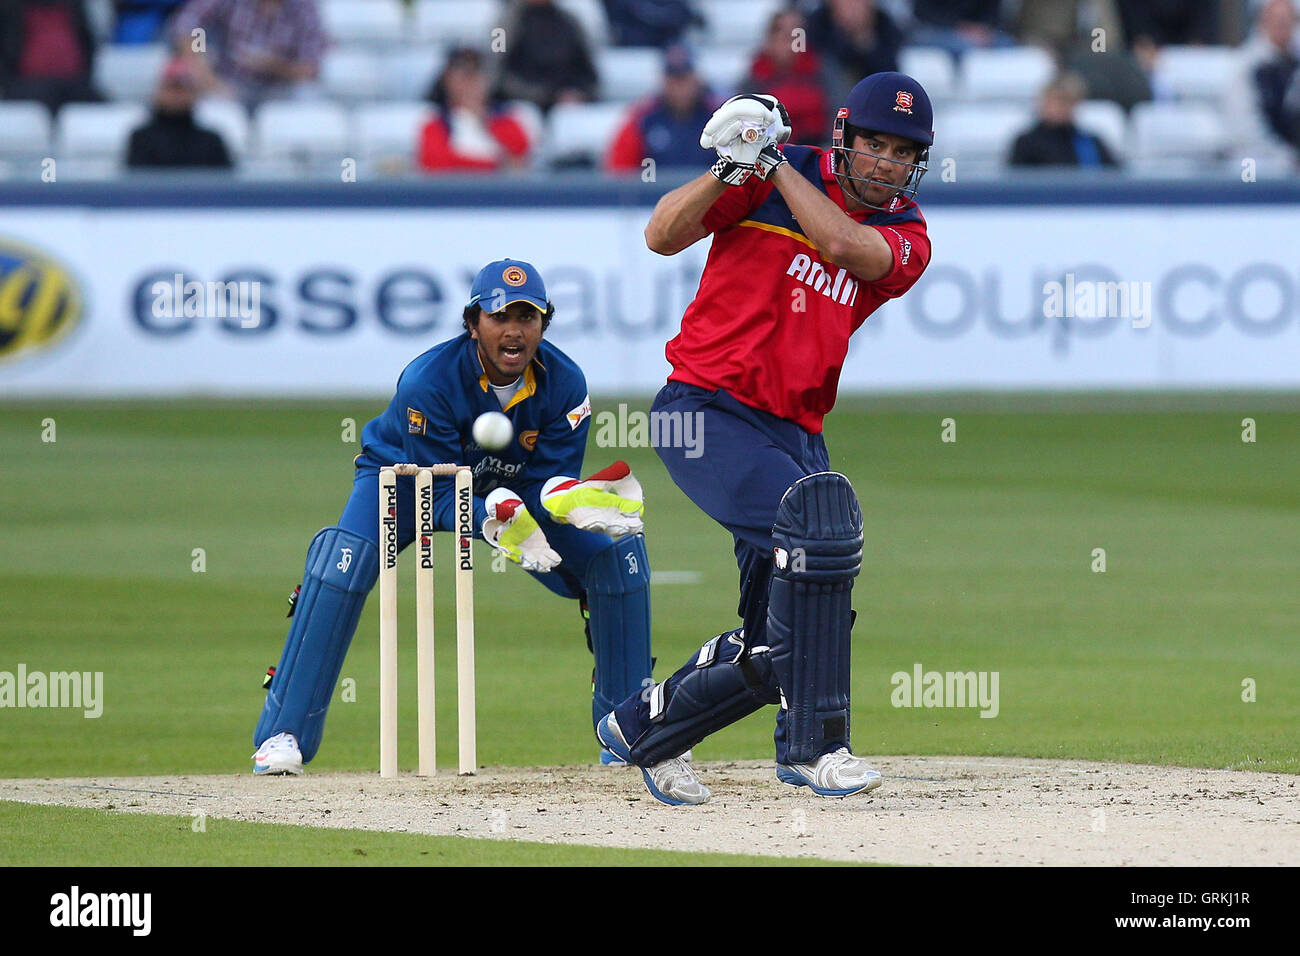 Alastair Cook of Essex hits out as Dinesh Chandimal of Sri Lanka looks on - Essex Eagles vs Sri Lanka - 50-over Tour Match at the Essex County Ground, Chelmsford - 13/05/14 Stock Photo